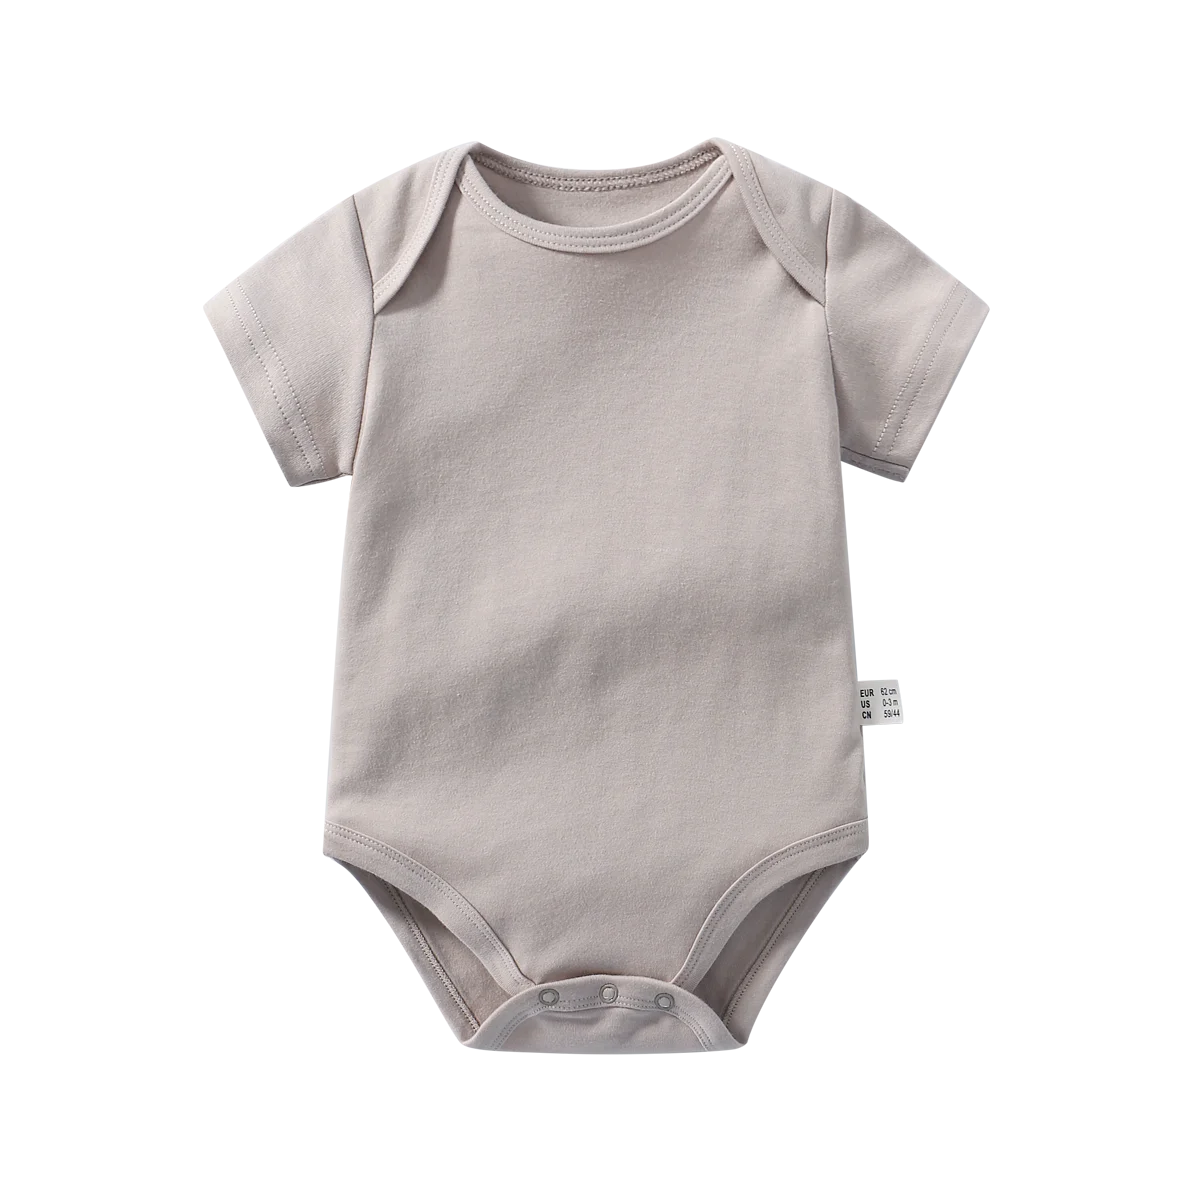 hiërarchie postkantoor Ondeugd Wholesale Onesie Baby Clothes Romper Plain Custom Printing Short Sleeve  Colorful Blank 100% Organic Combed Cotton Baby Romper - Buy Baby ' Rompers,Baby  Romper Newborn,Baby Clothes Product on Alibaba.com